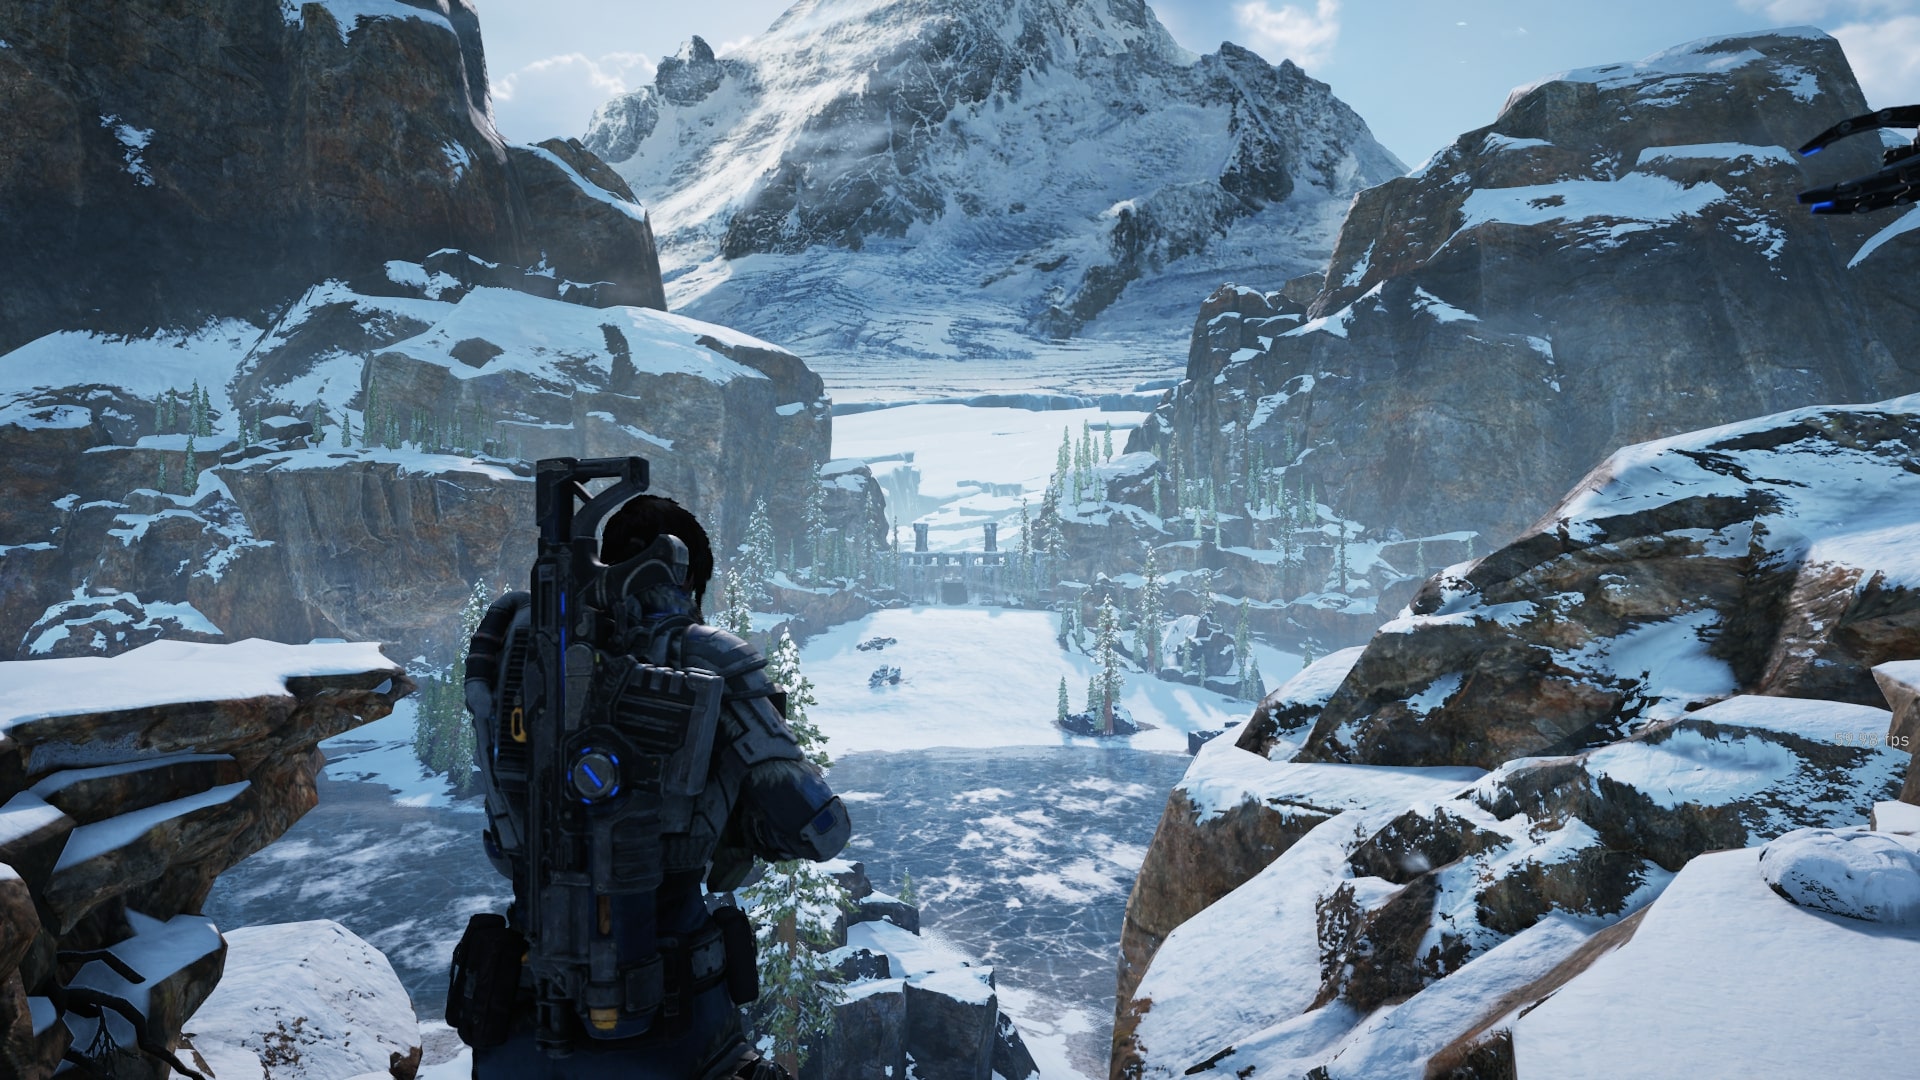 Gears 5 Operation 6 is now live, no new achievements will be added